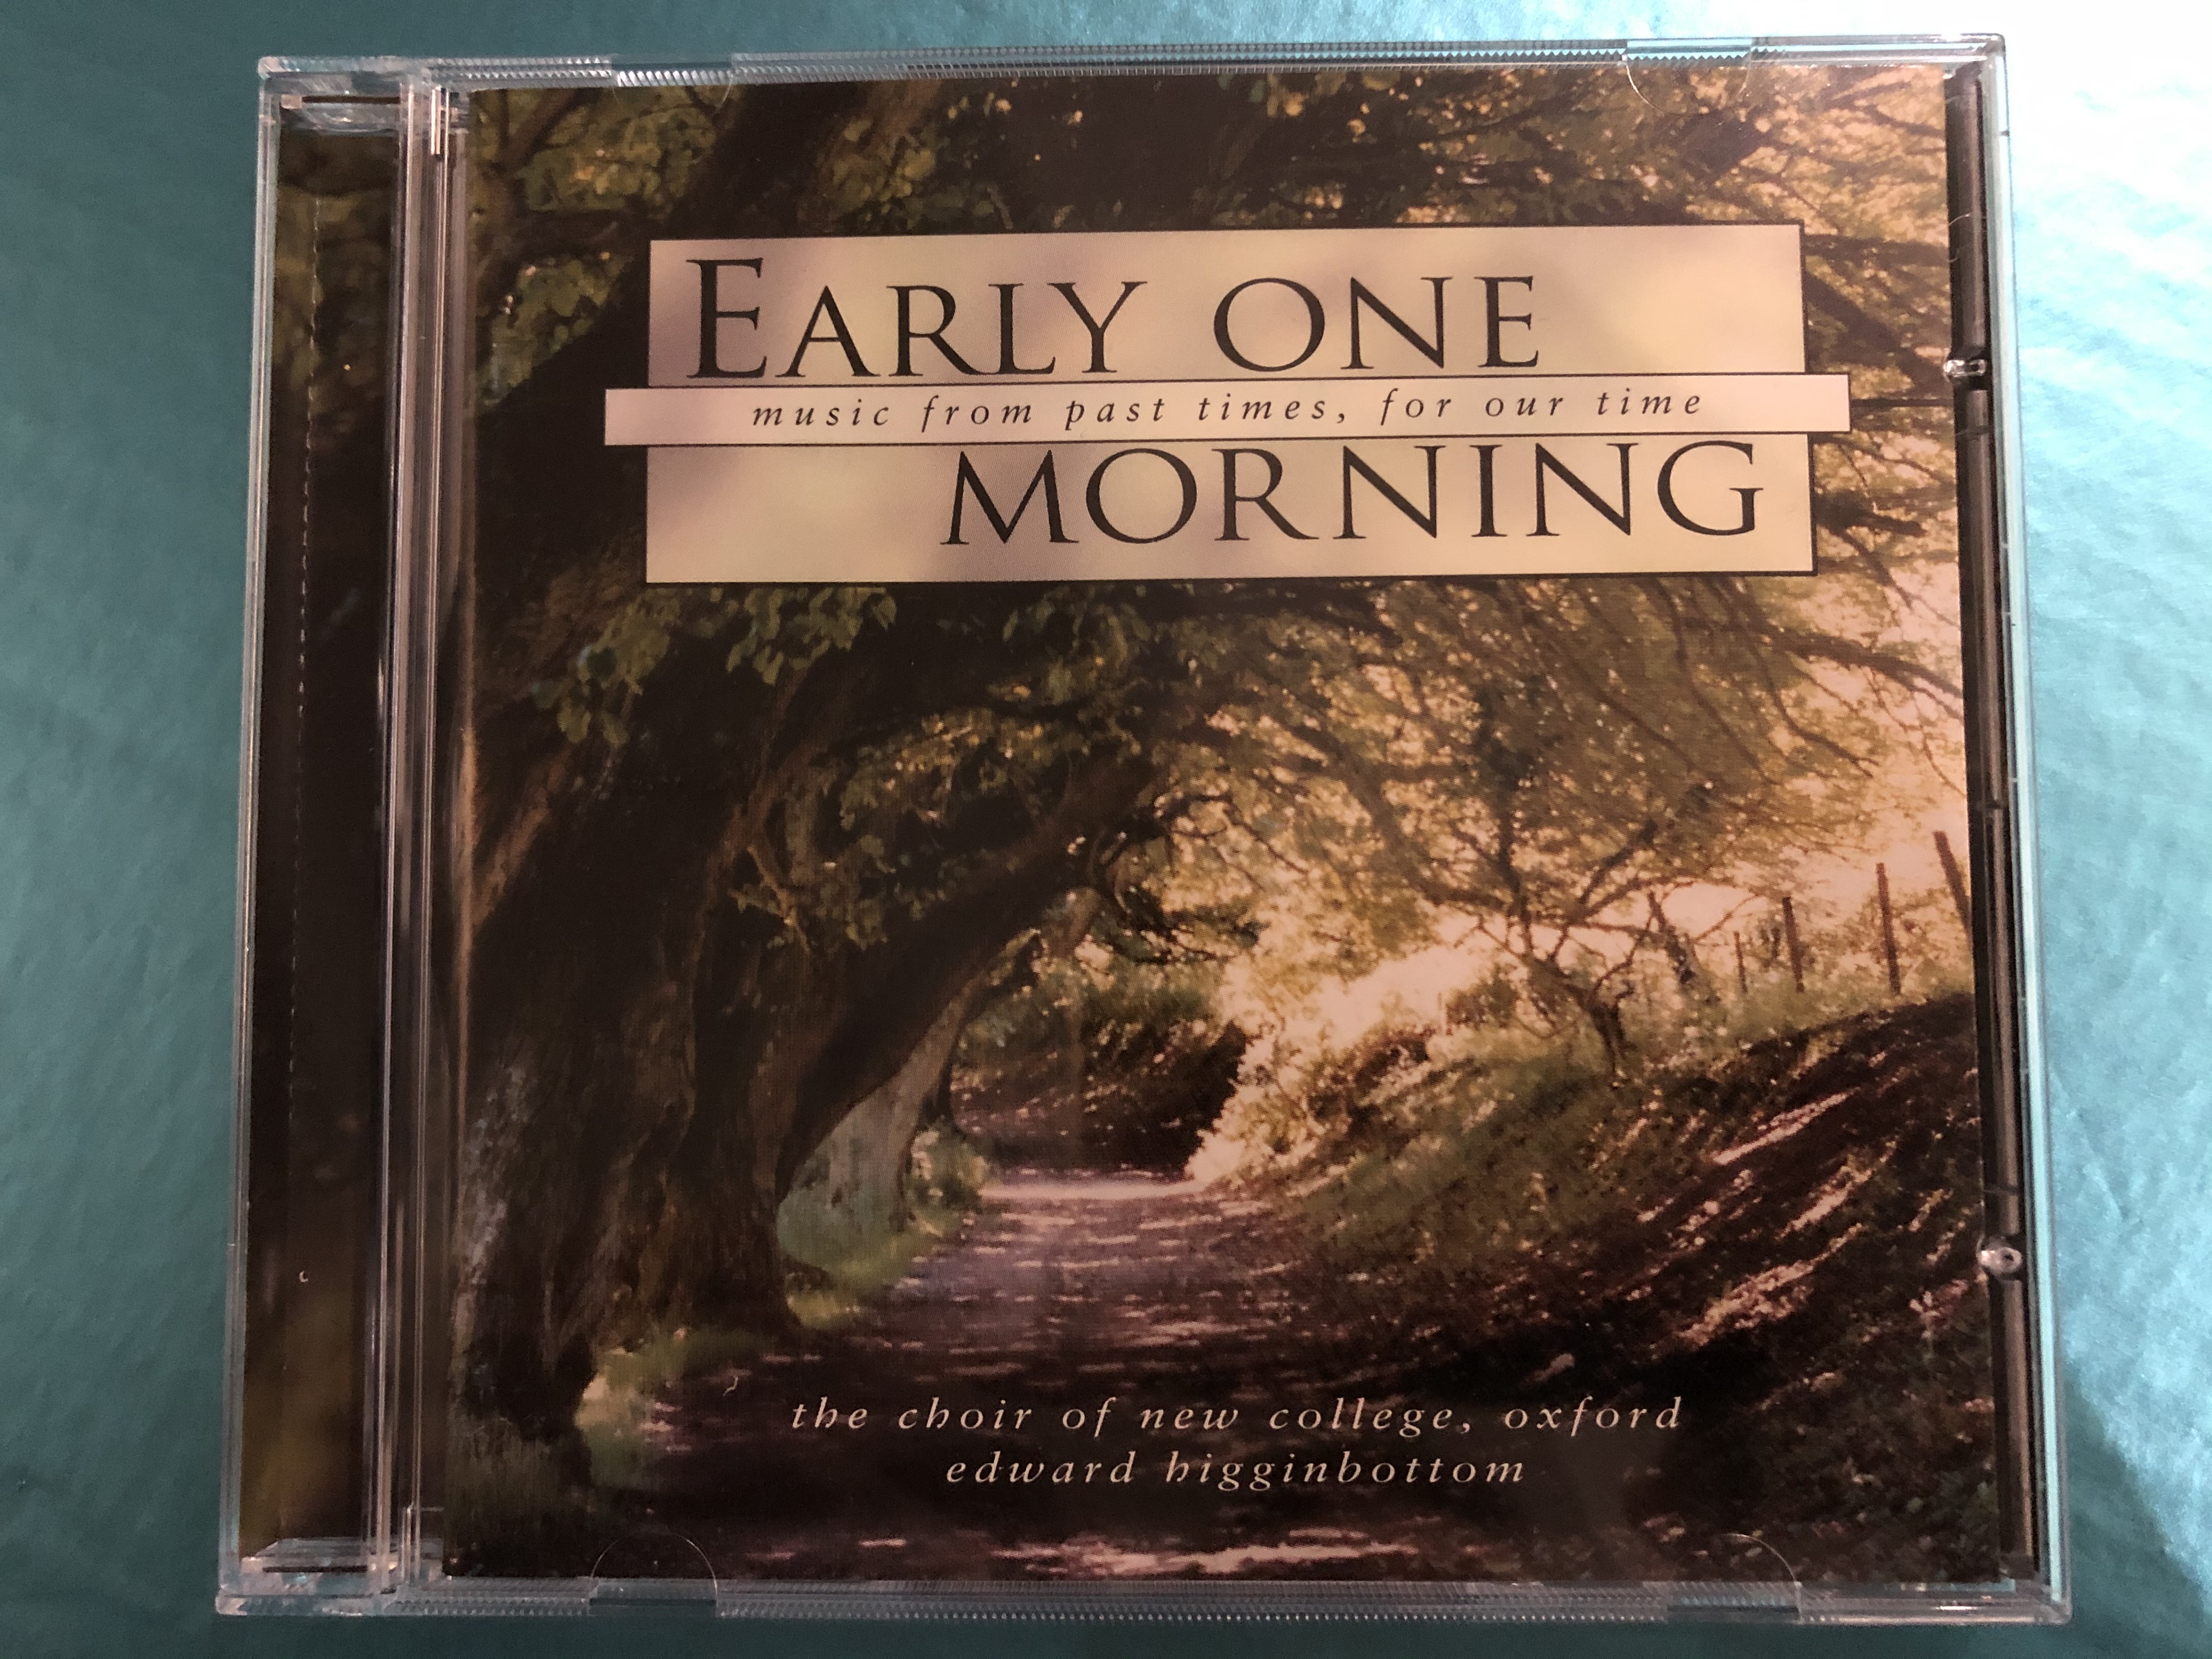 early-one-morning-music-from-past-times-for-our-time-the-choir-of-new-college-oxford-edward-higginbottom-erato-audio-cd-1997-0630-19065-2-1-.jpg